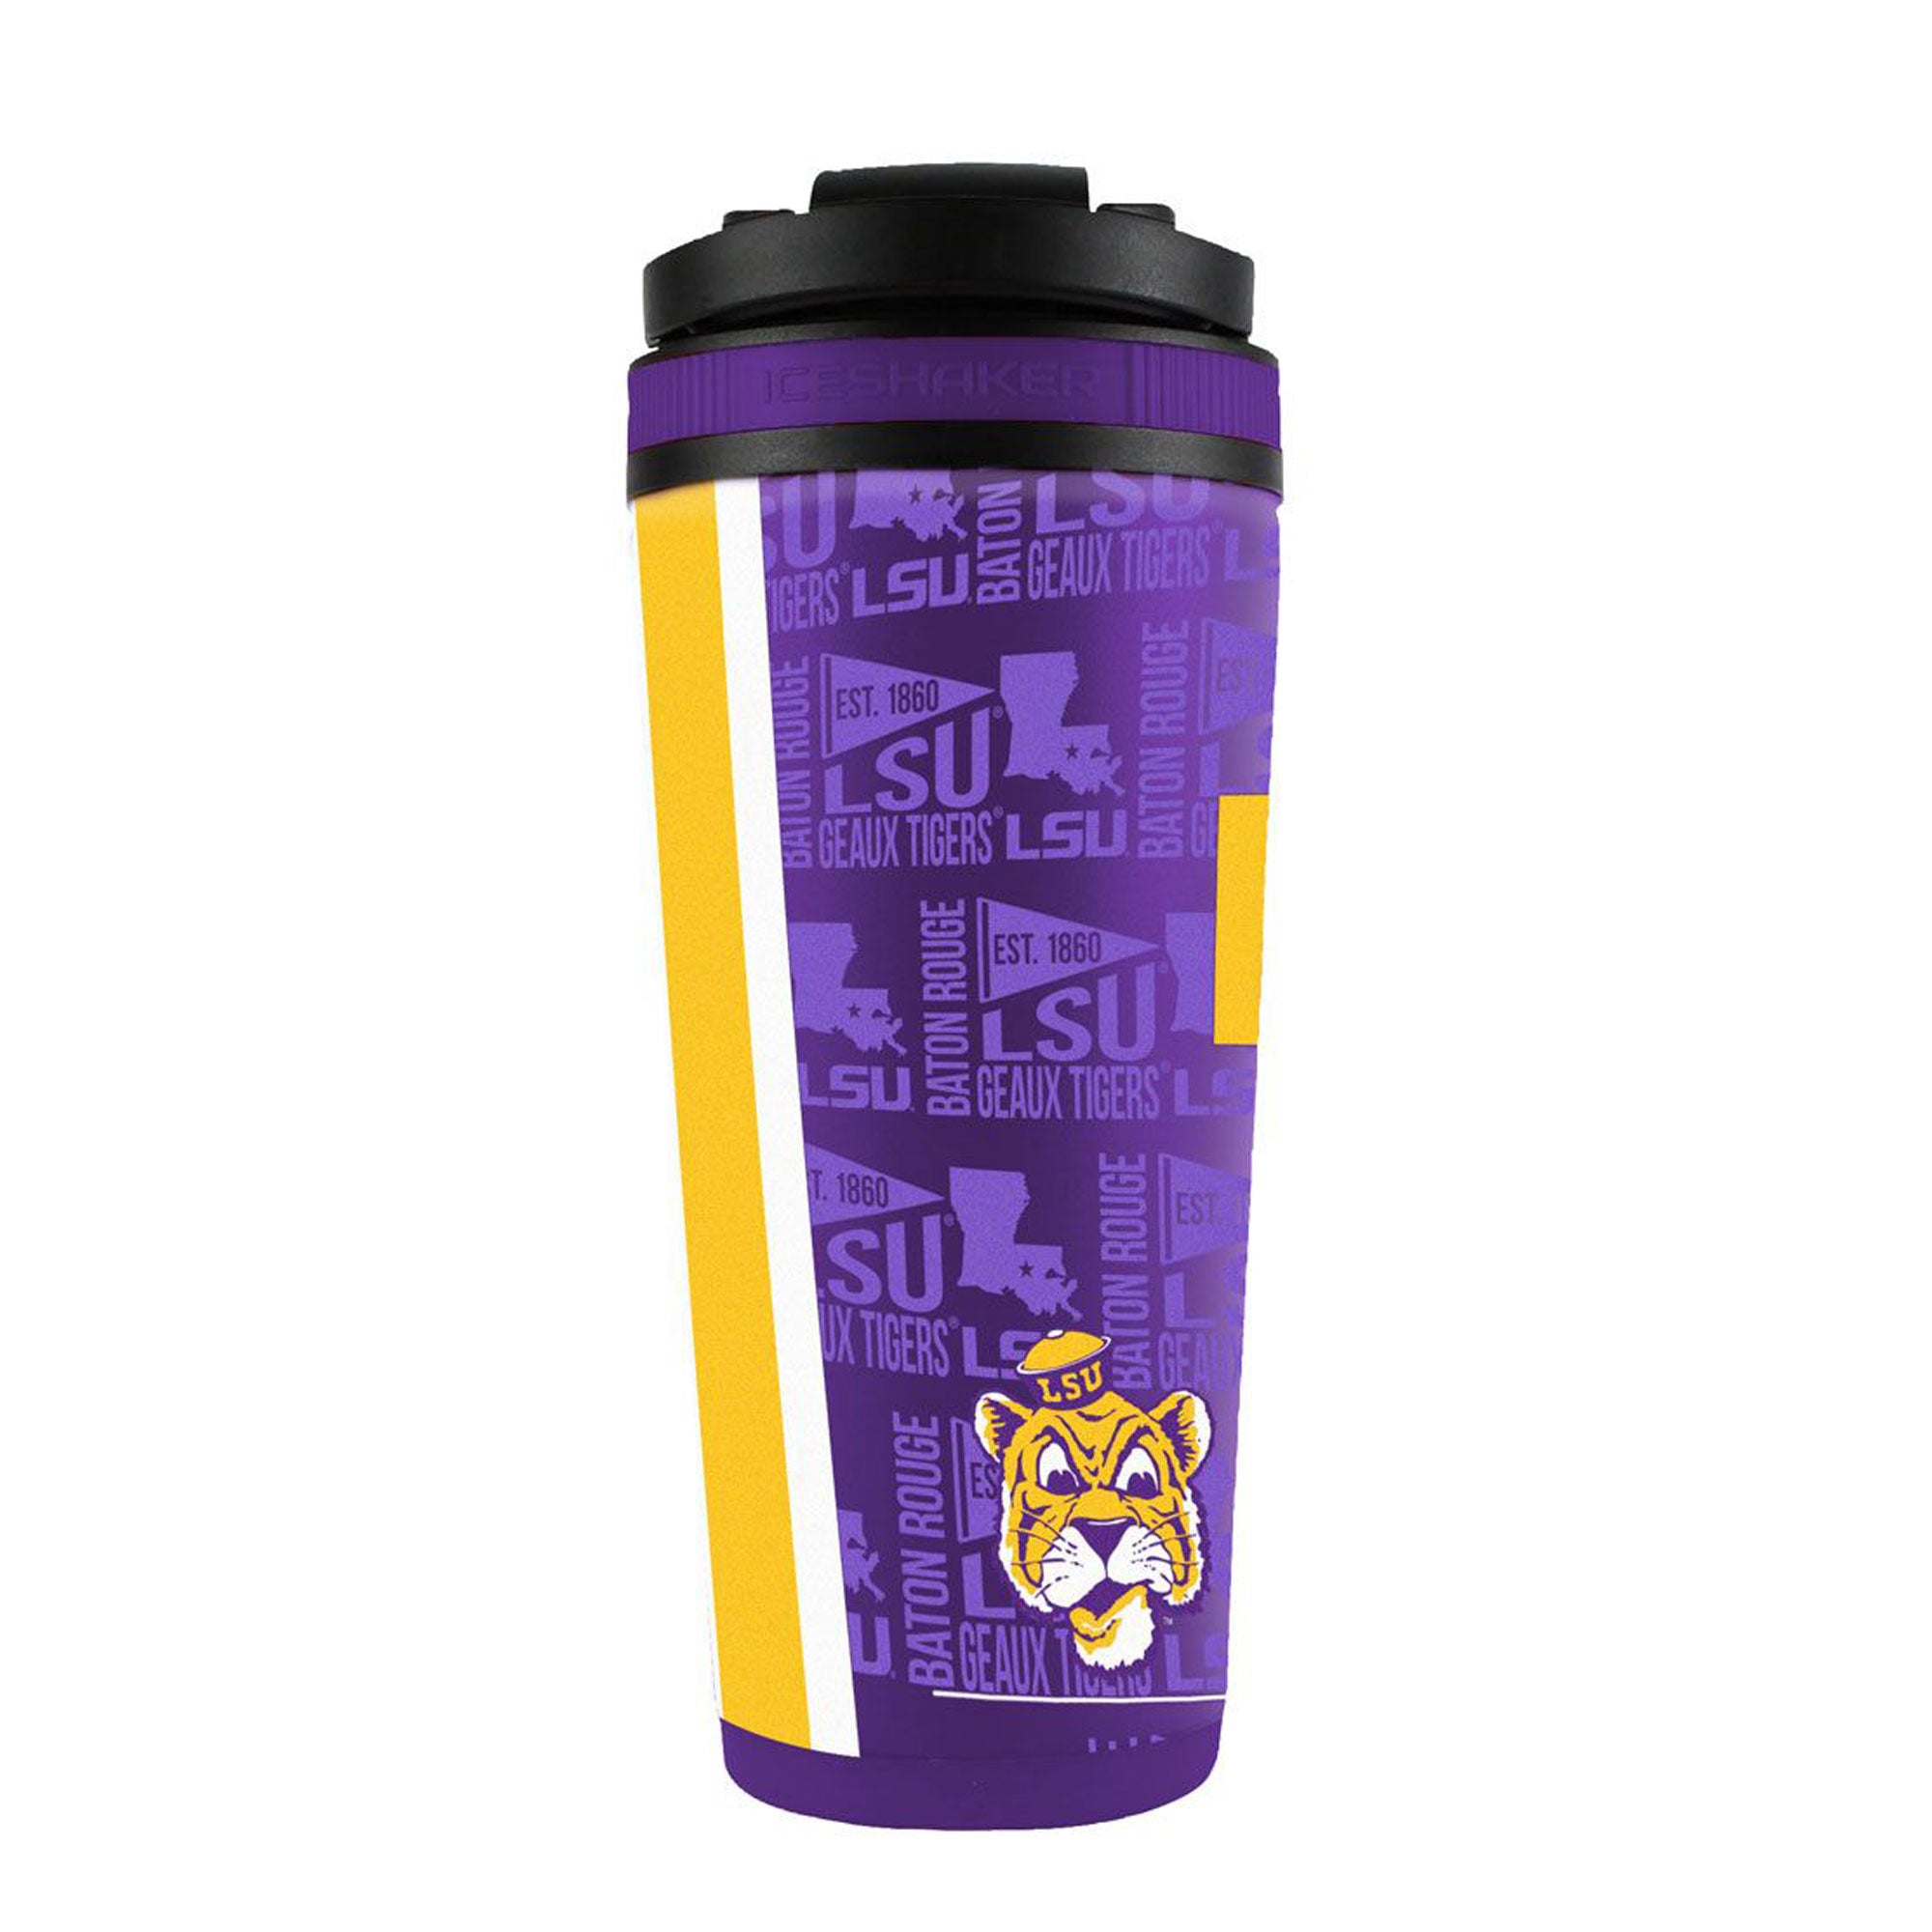 The College Vault - LSU Tigers 4D Ice Shaker